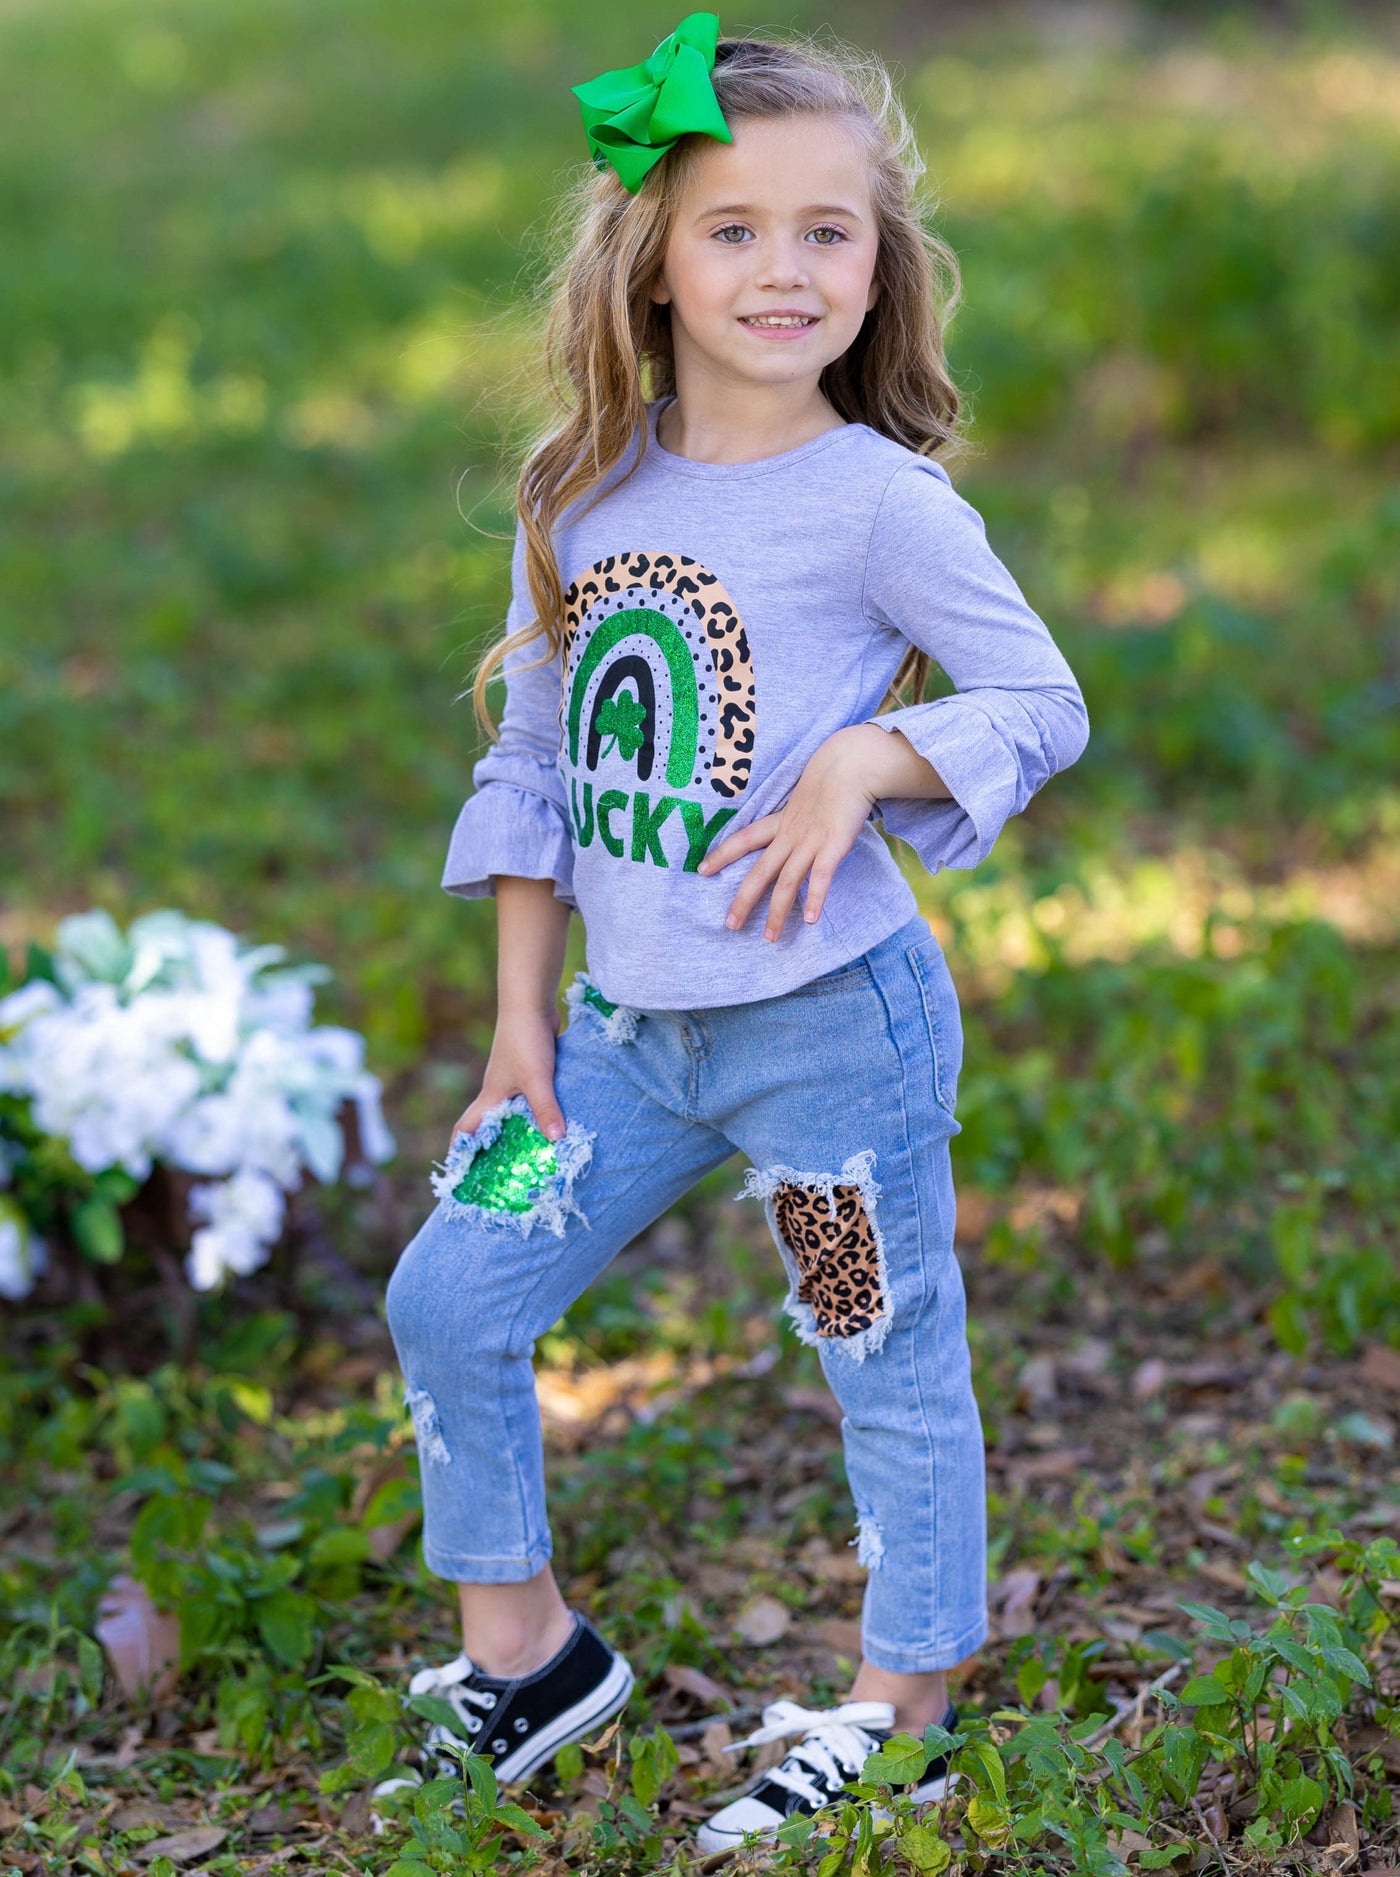 St. Patrick's Day Clothes | Girls Lucky Top & Patched Jeans Set